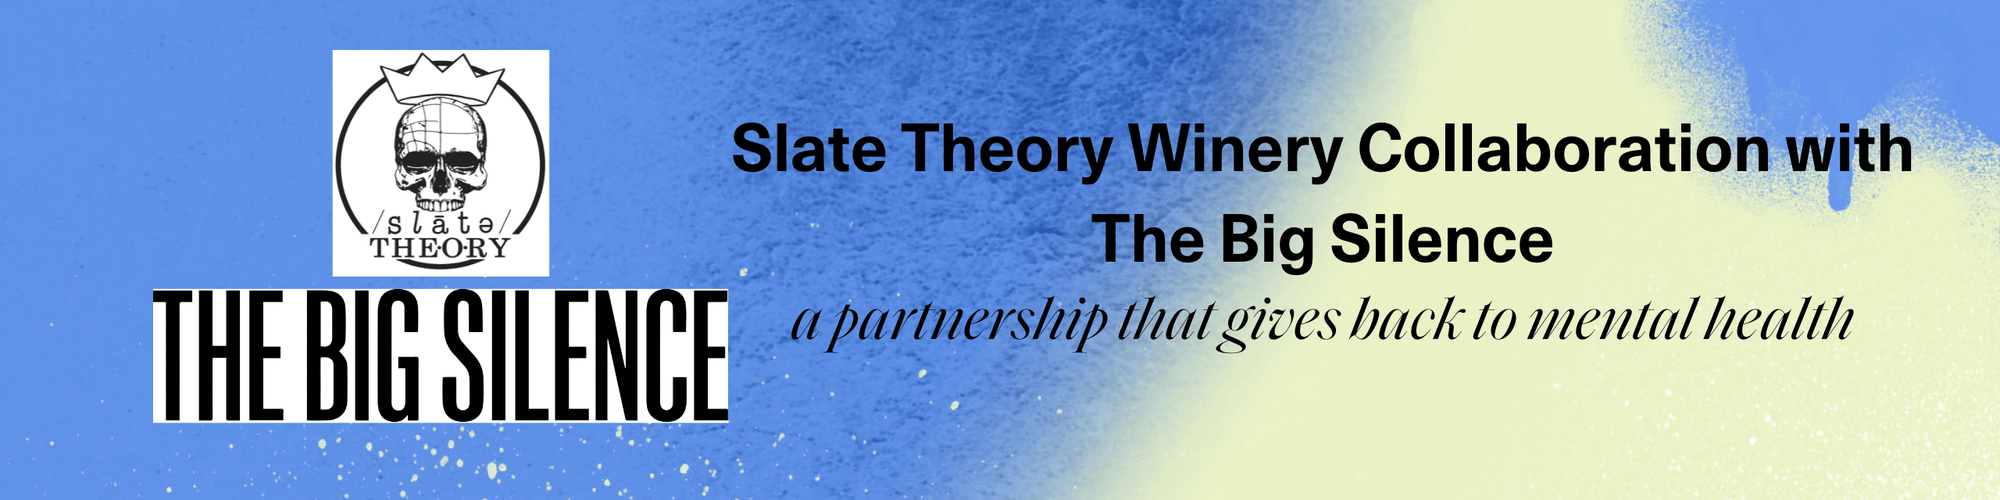 Slate Theory Winery Collaboration with The Big Silence